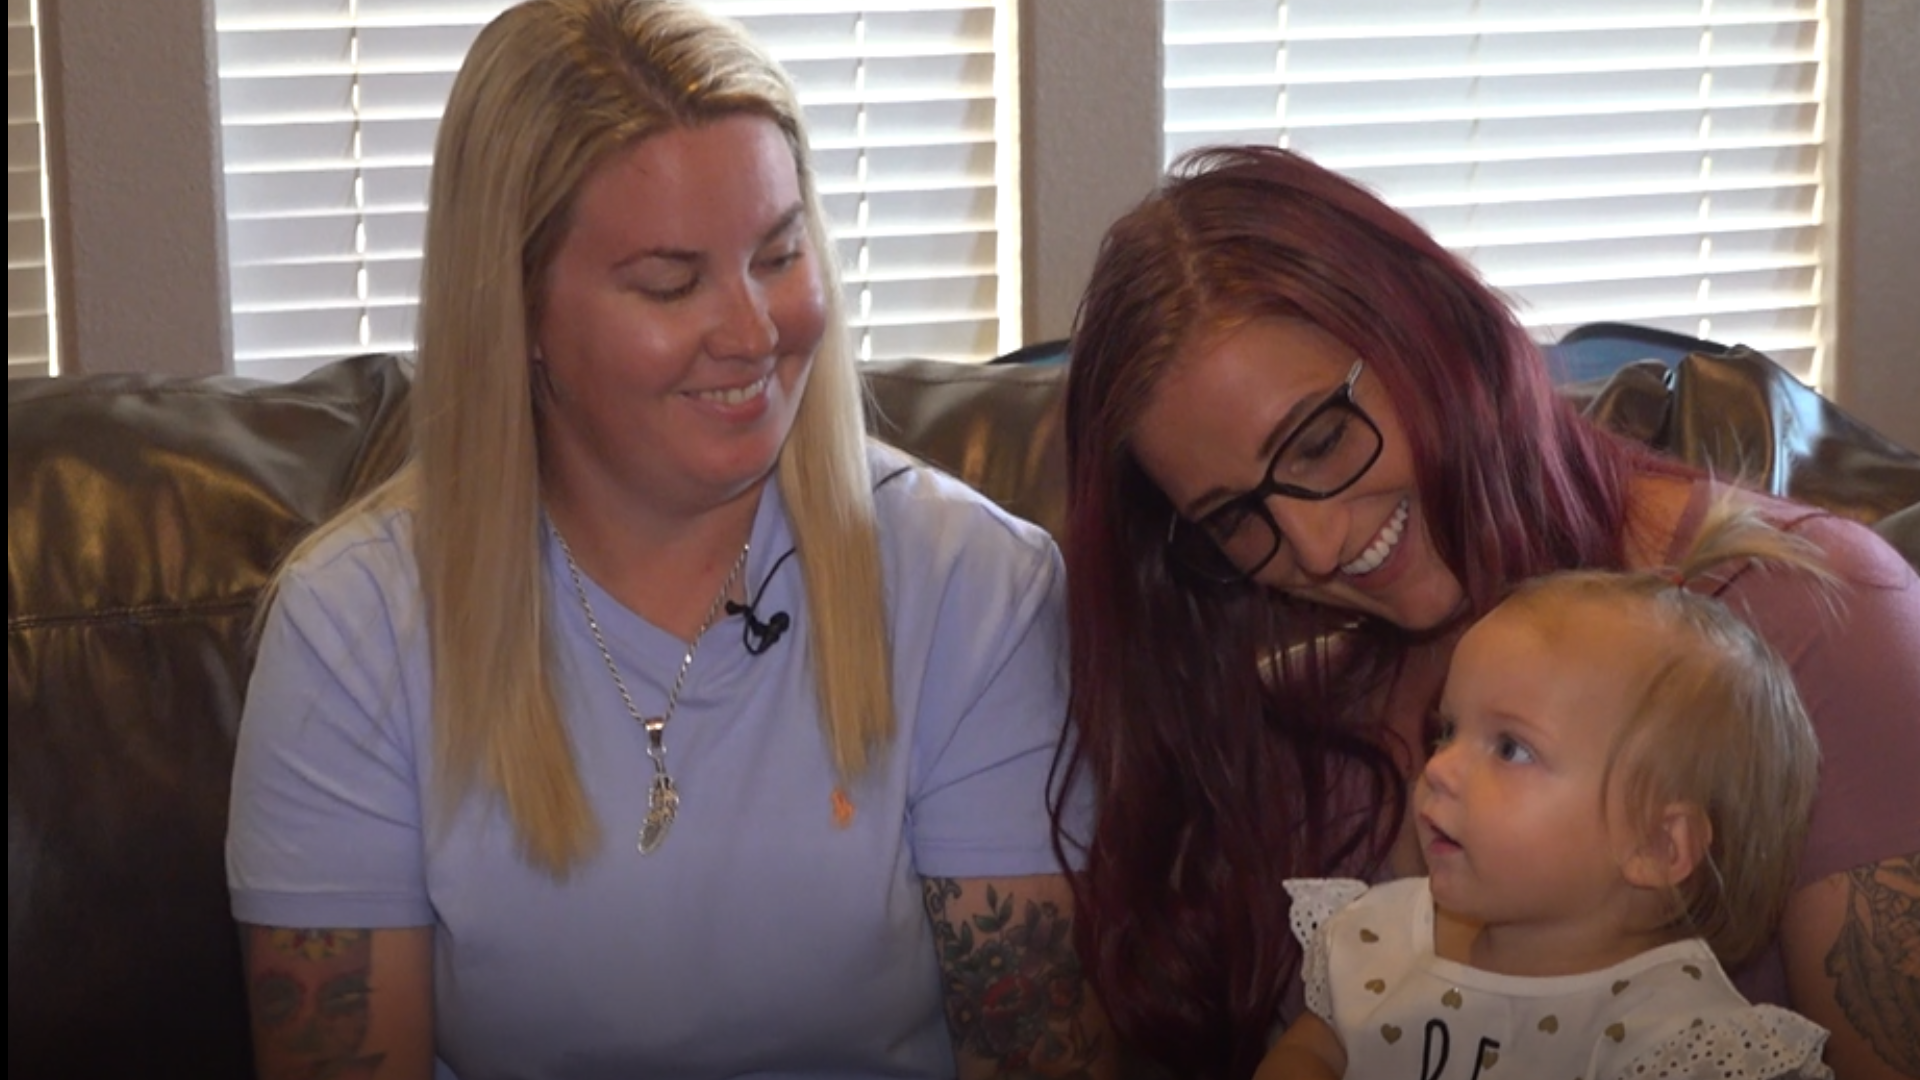 A Waco couple said a day care denied their daughter admission after learning her parents are in a lesbian marriage.